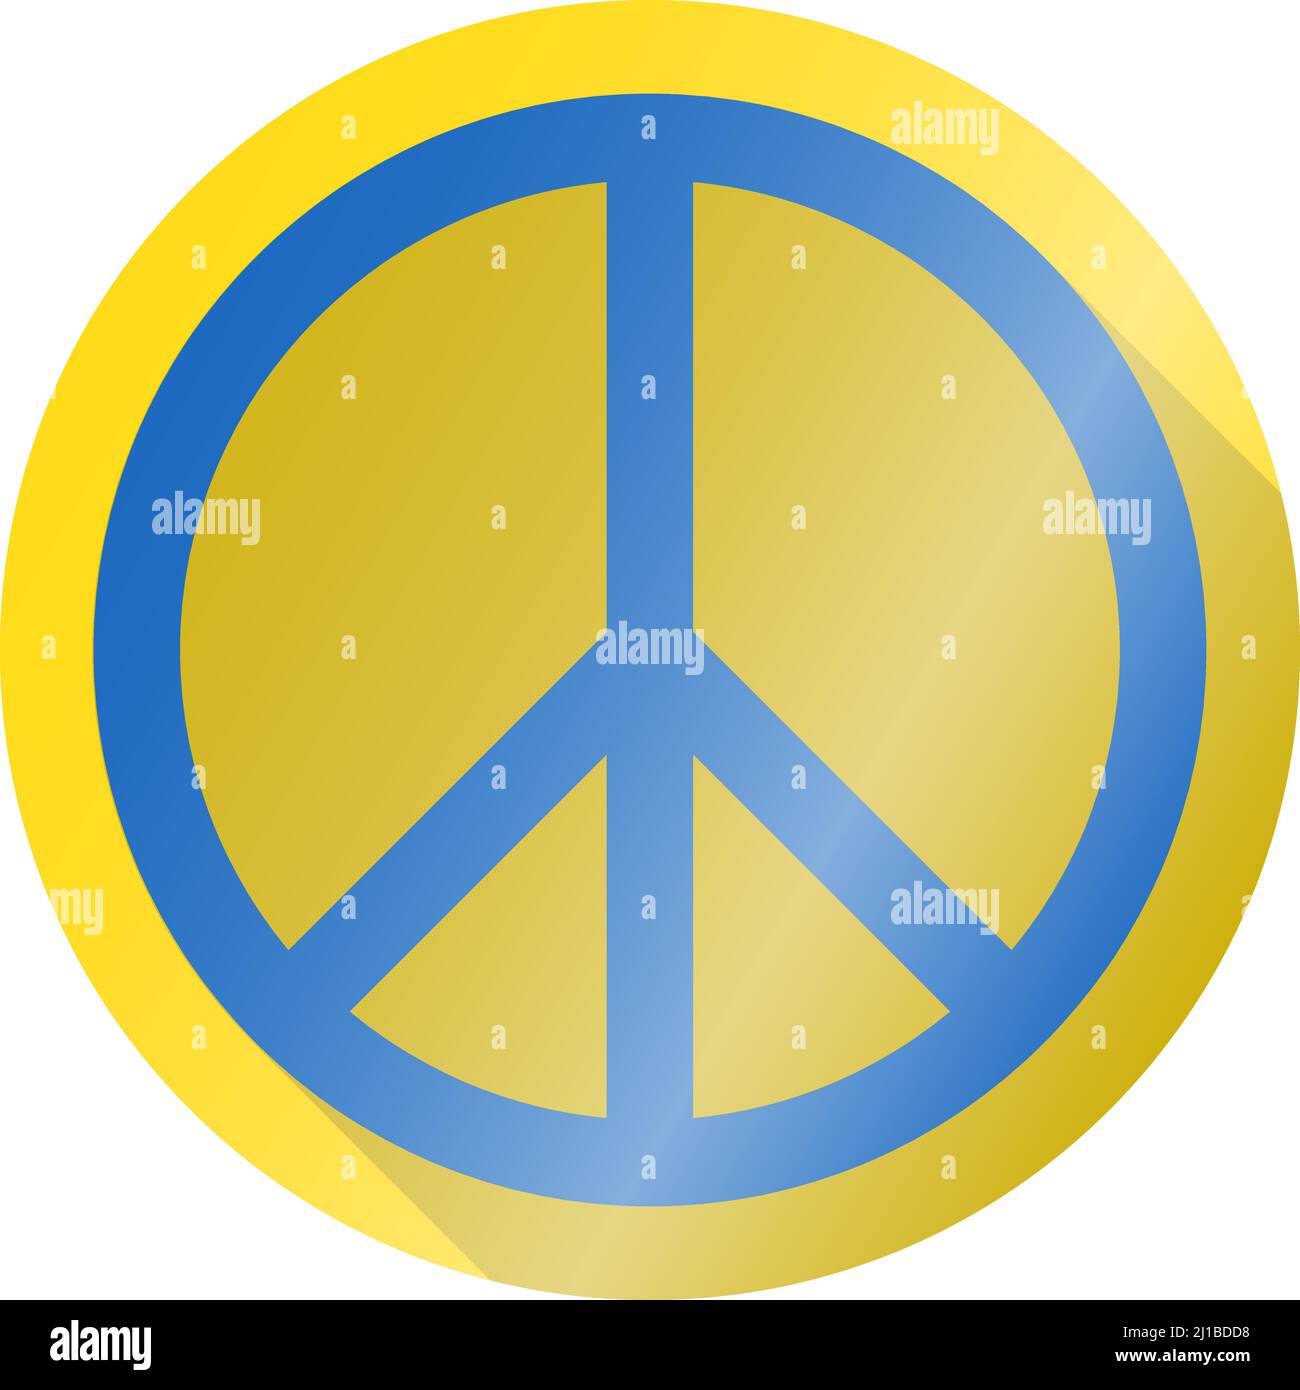 shiny peace sign or peace symbol in Ukrainian national colors, vector illustration Stock Vector